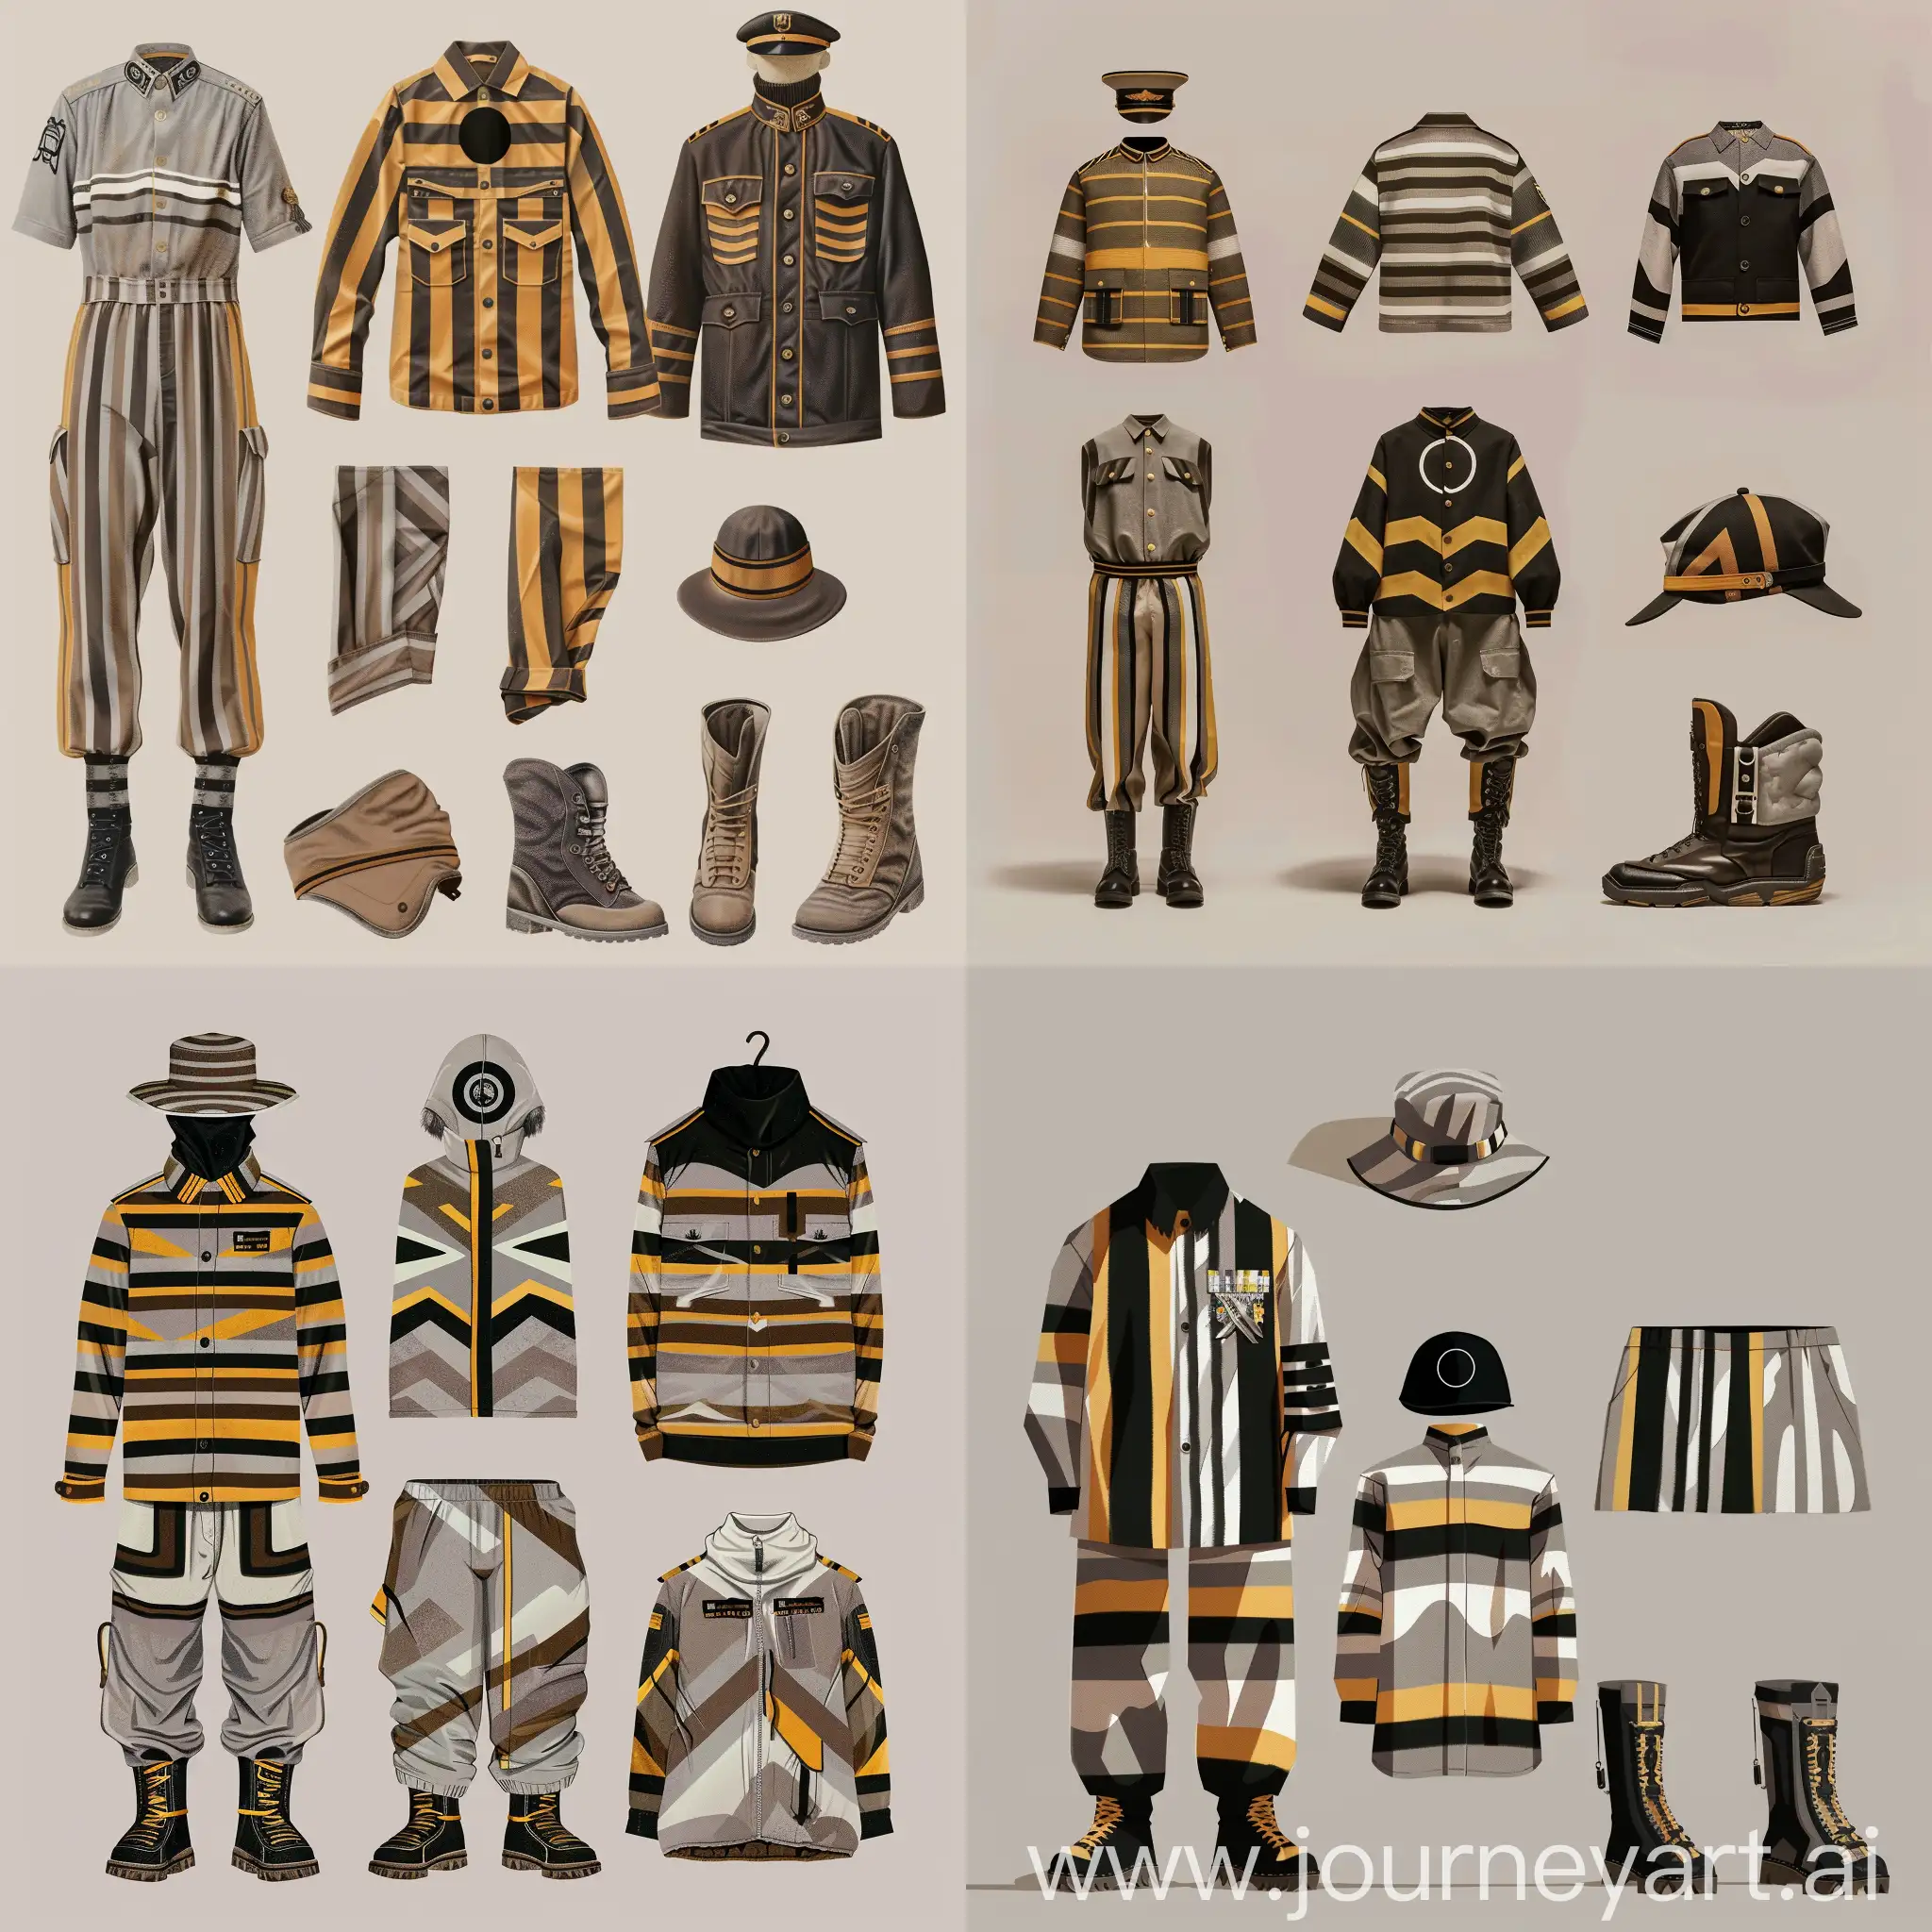 1. The military shirt and trousers: A striped shirt and trousers with colors inspired by the mountains, the main color of the pattern could be gray with brown and white lines representing the nature of the mountains.

2. The military jacket: A striped jacket in black and yellow, the design may feature horizontal lines that embody strength and sharpness, with military details highlighting the character of the uniform.

3. The military hat: A striped military hat with a black circle in the center symbolizing unity and discipline, it may also bear a badge or military insignia to enhance its distinction.

4. The military boots: Large military boots with a strong and practical design, reflecting the strength and toughness of the military uniform in general.